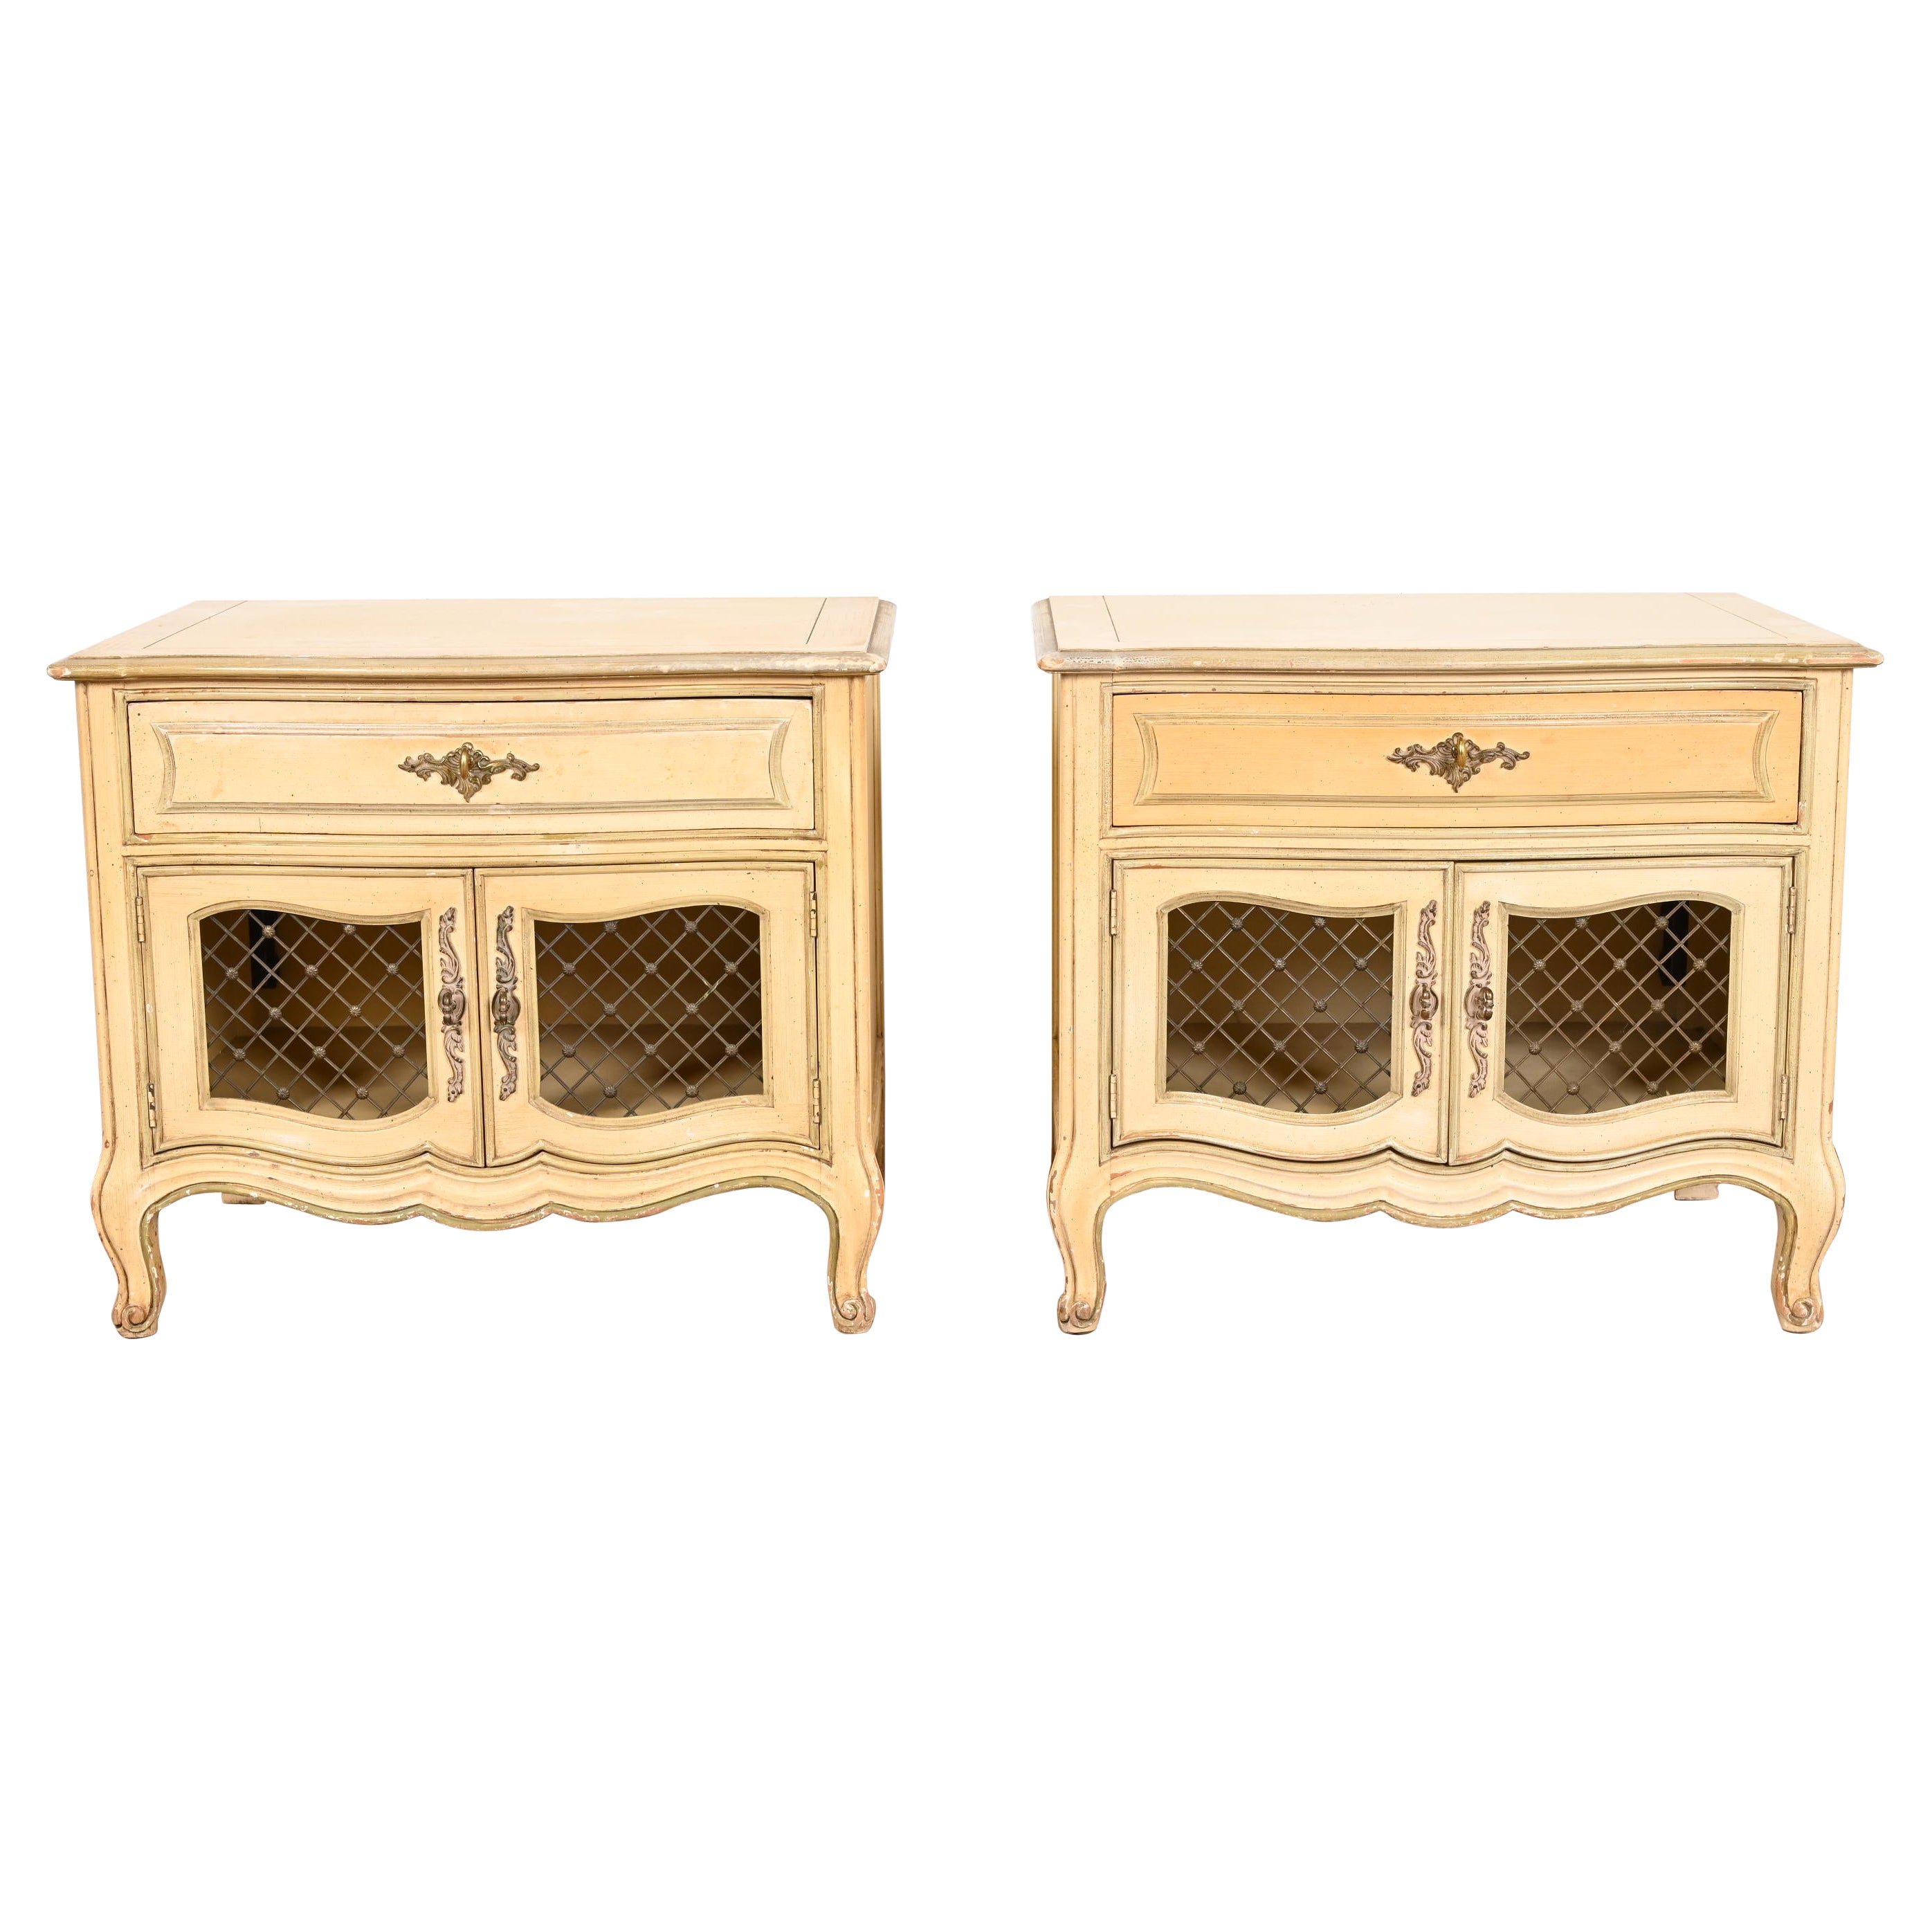 Henredon French Provincial Louis XV Cream Lacquered Nightstands, Pair